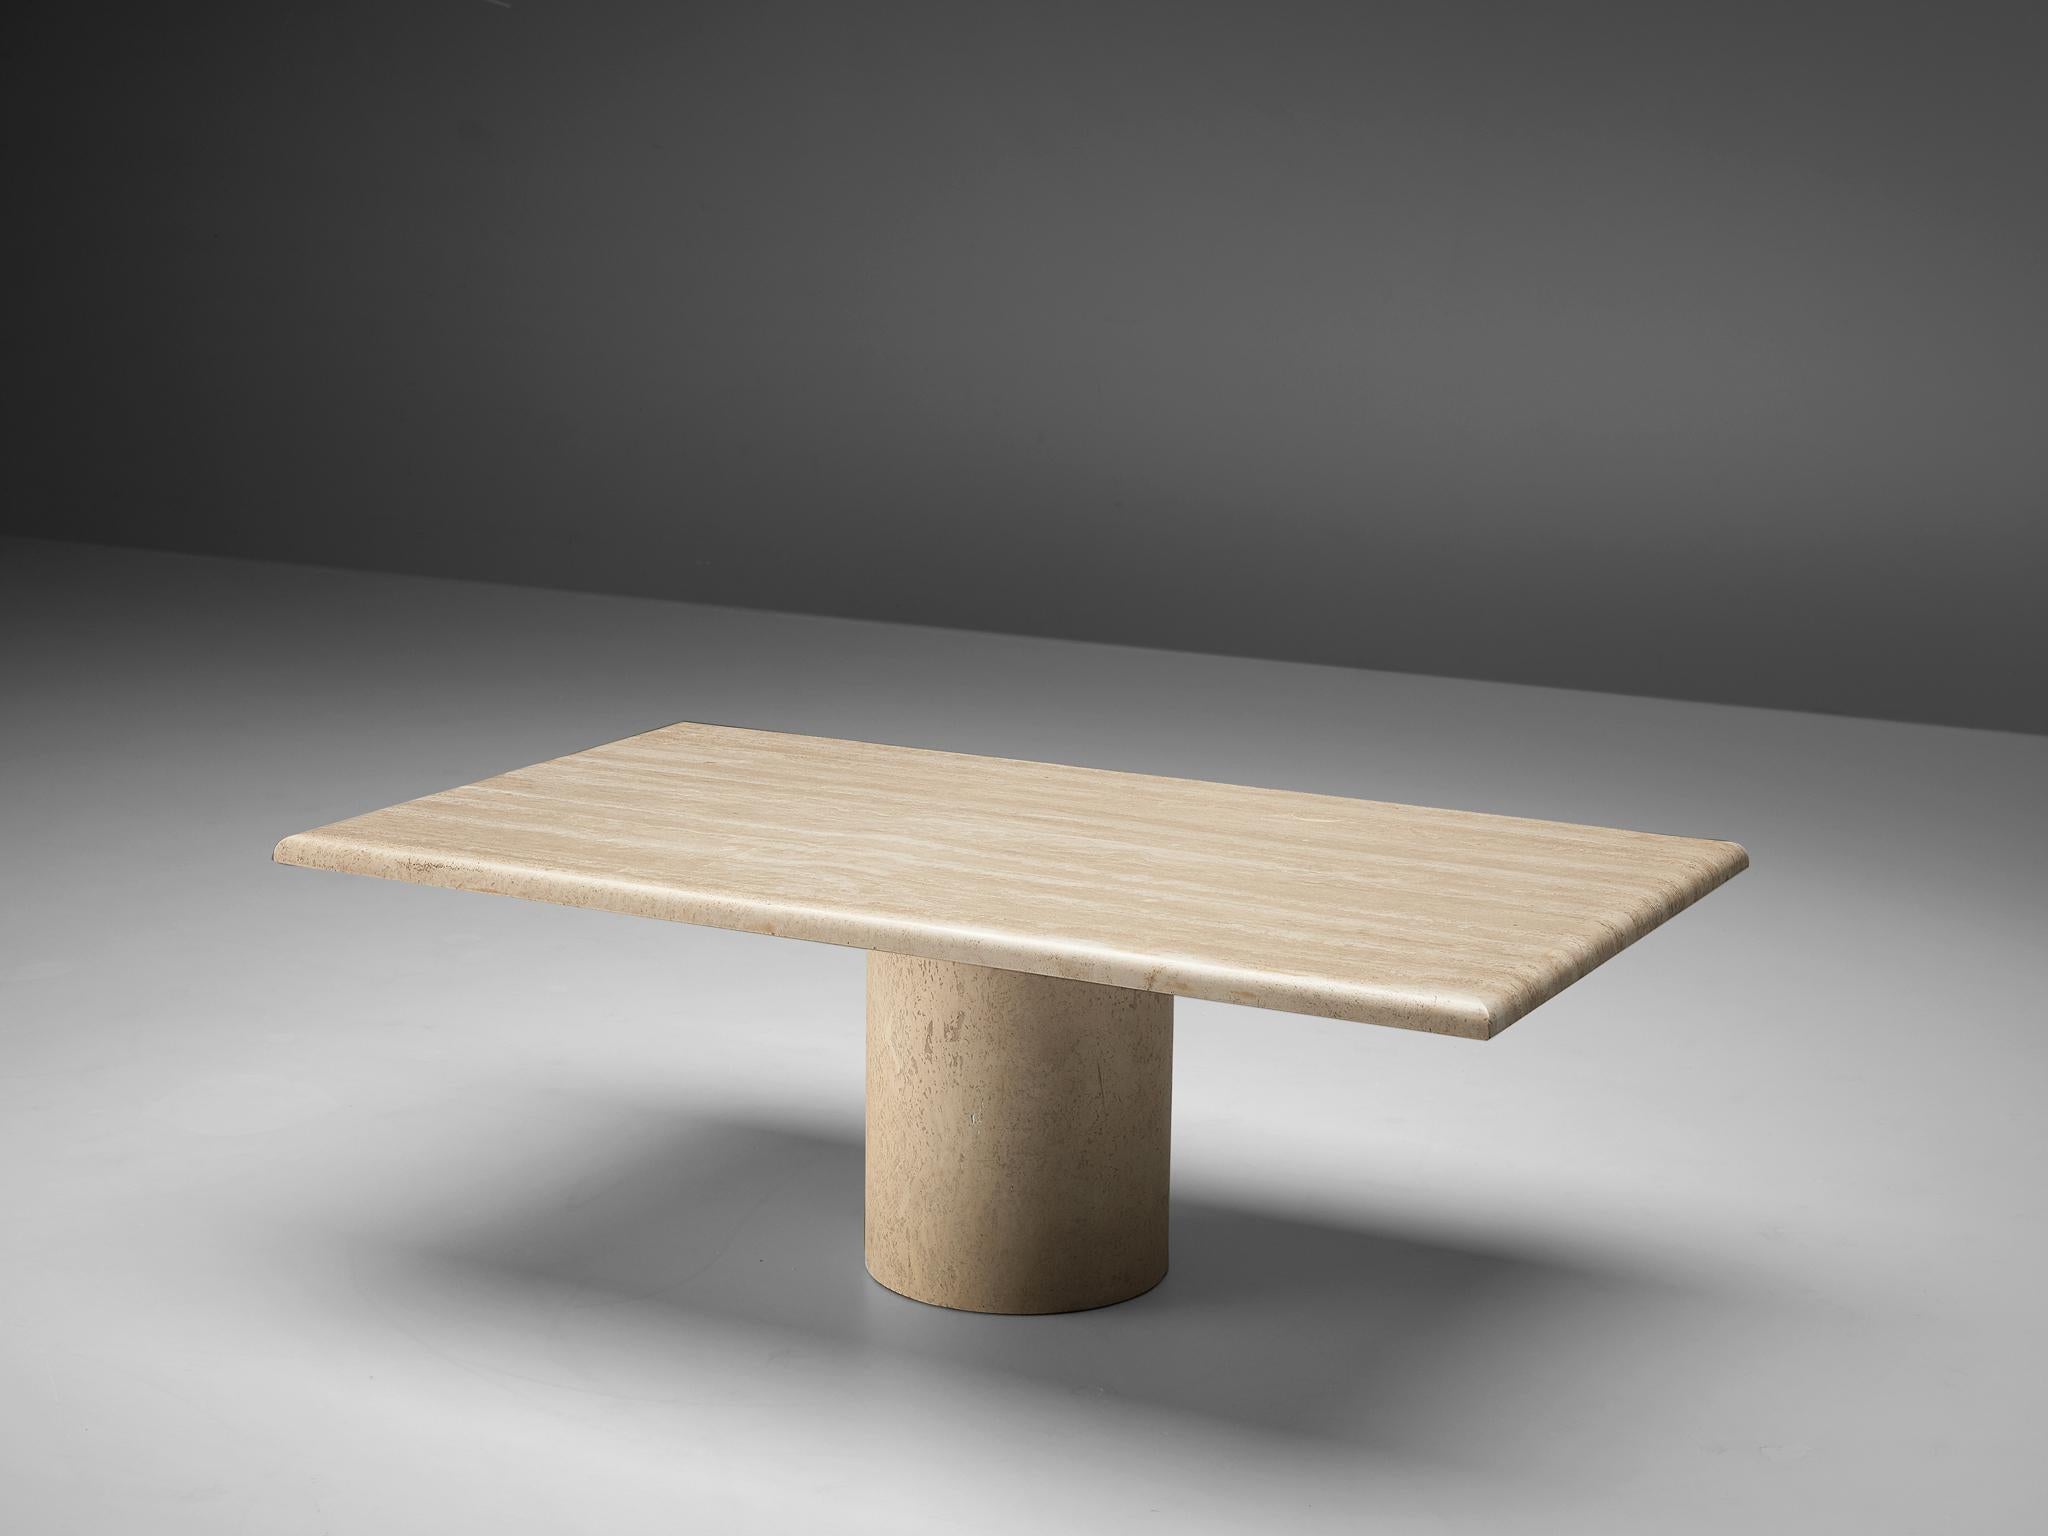 Coffee table, travertine, Italy, 1970s

With a travertine angular tabletop and a strong cylindric travertine base this pedestal coffee table shows a minimalistic design. The bright travertine gives the table a sculptural look. The natural layers of